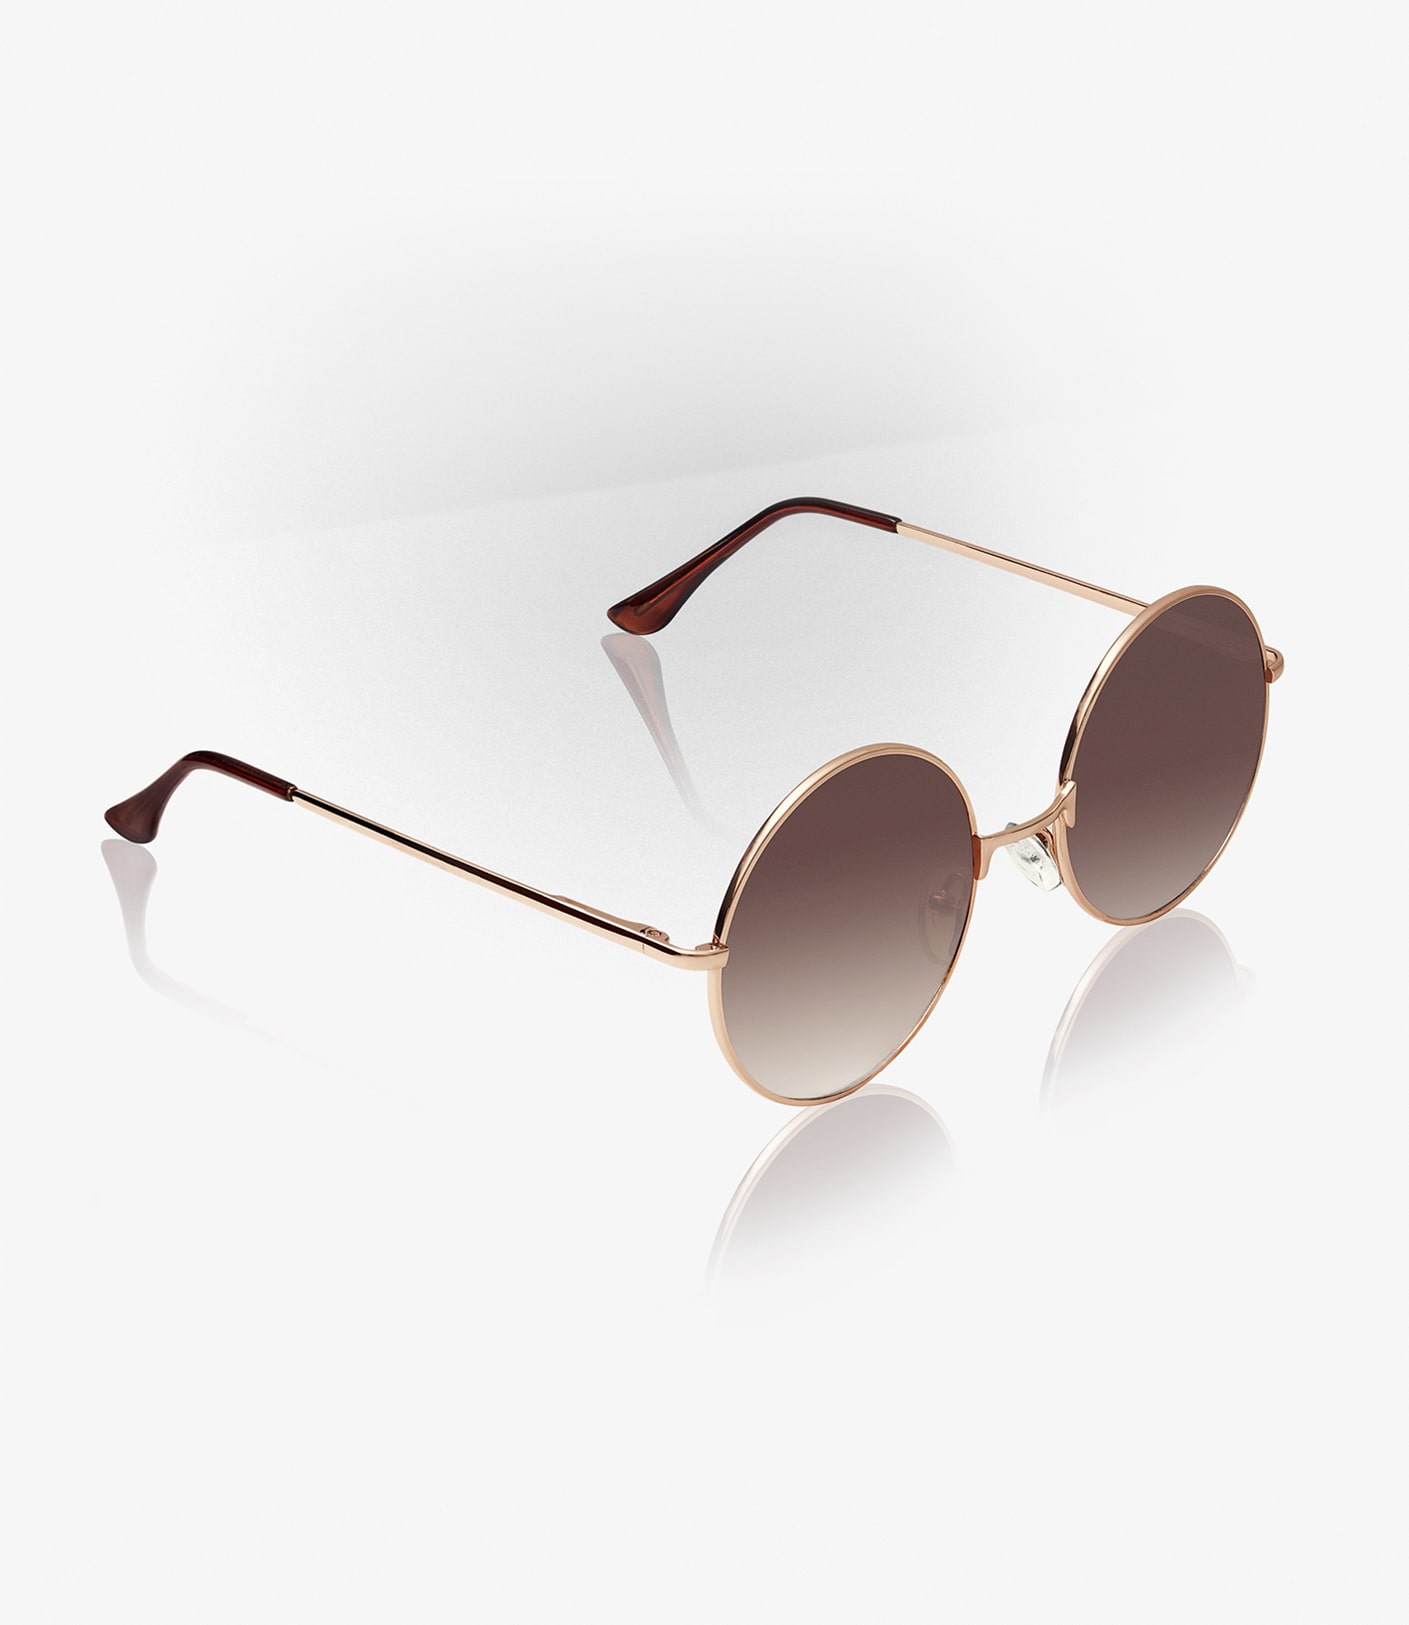 Product photo from a side view of Golden frame Sunglasses, on a white background